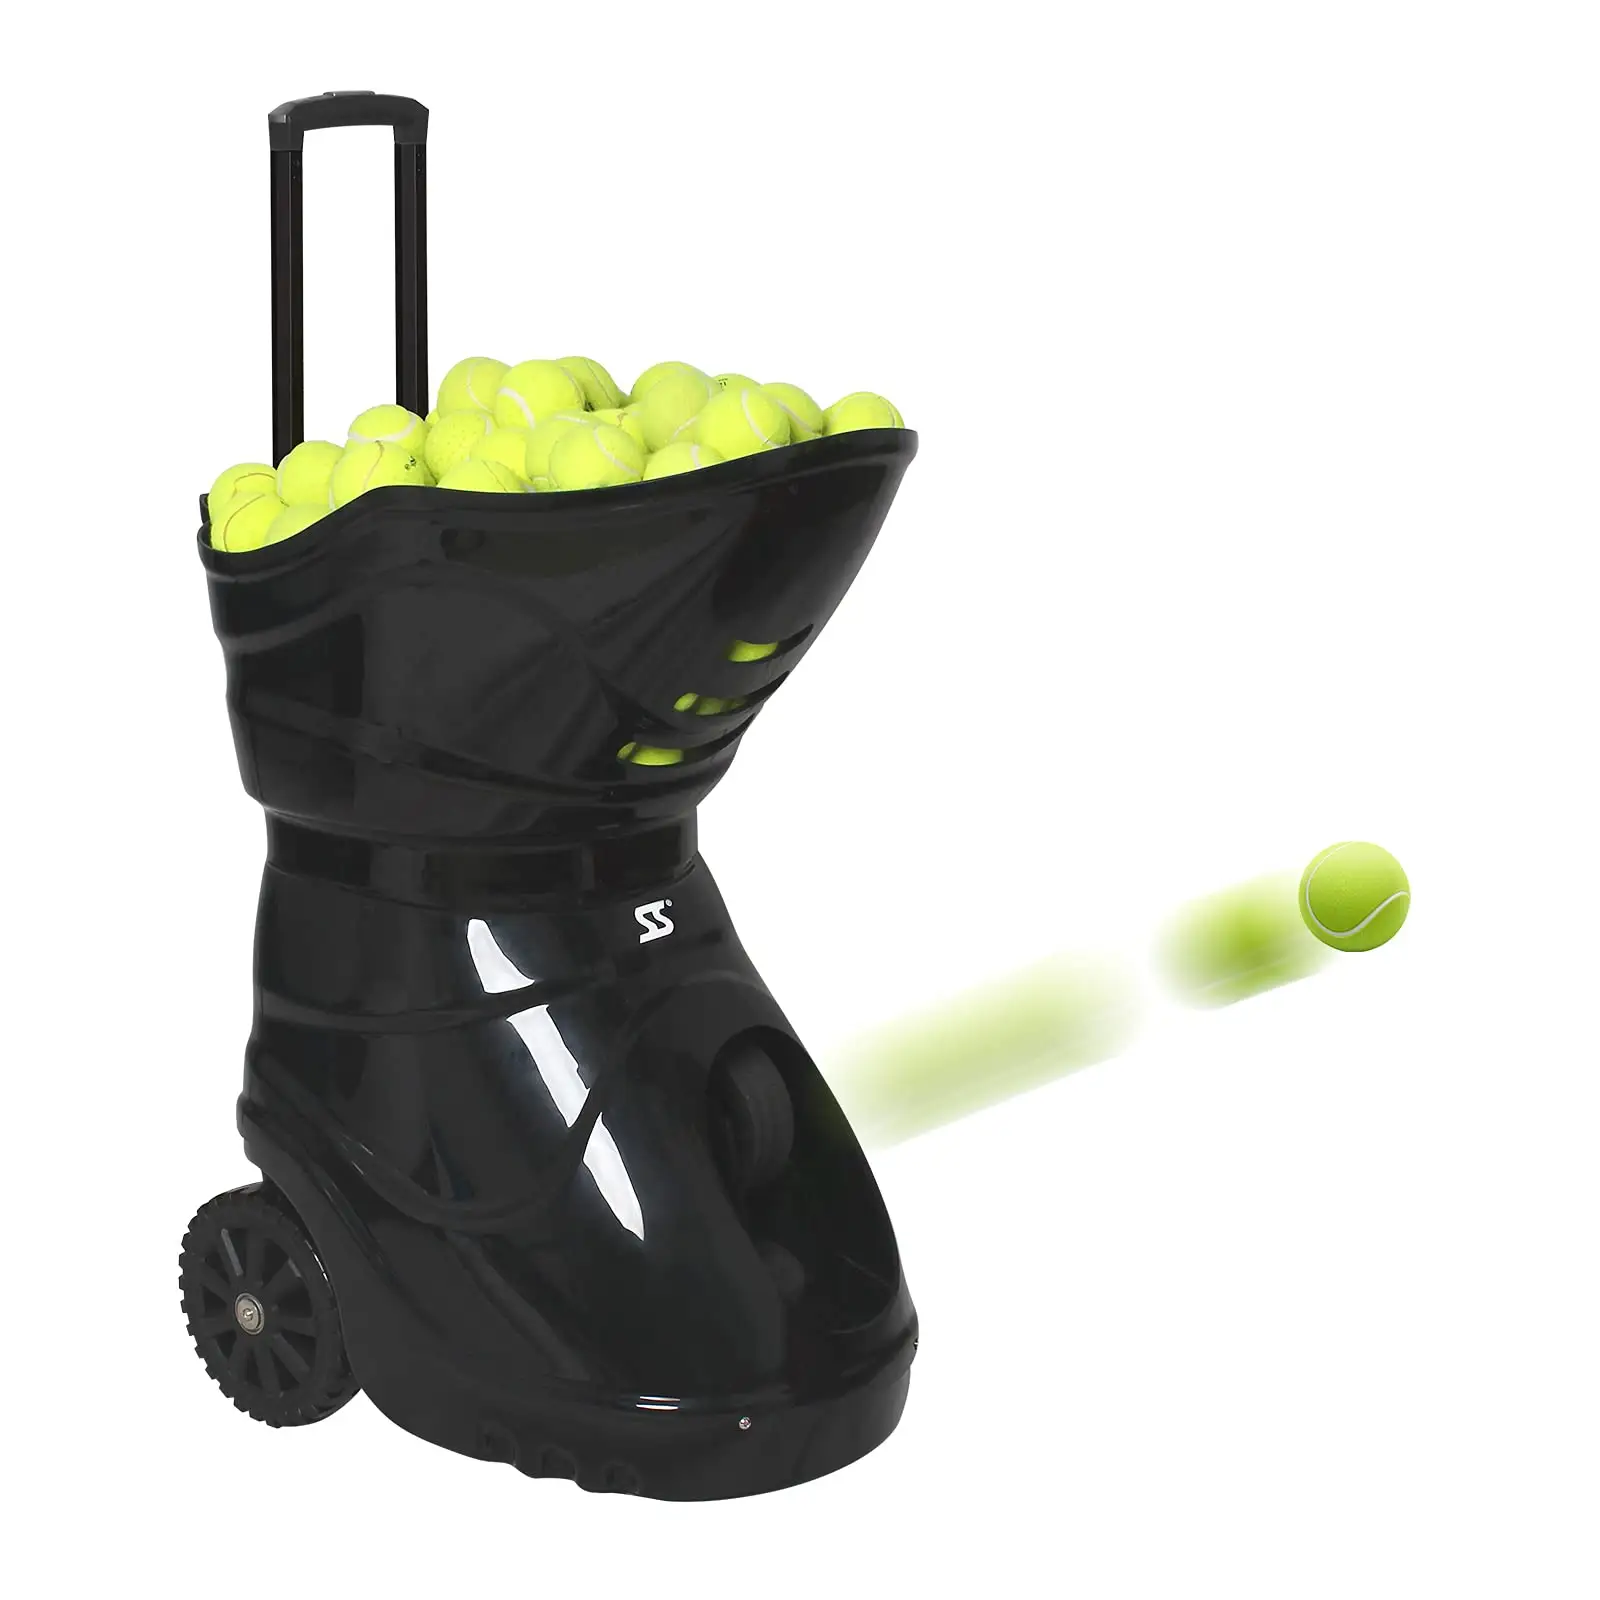 SKYEGLE Tennis Ball Machine Portable Tennis Ball Launcher Automatic Practice Equipment Ball Thrower Shooter with Remote Control for Beginner Tennis Training S2015 